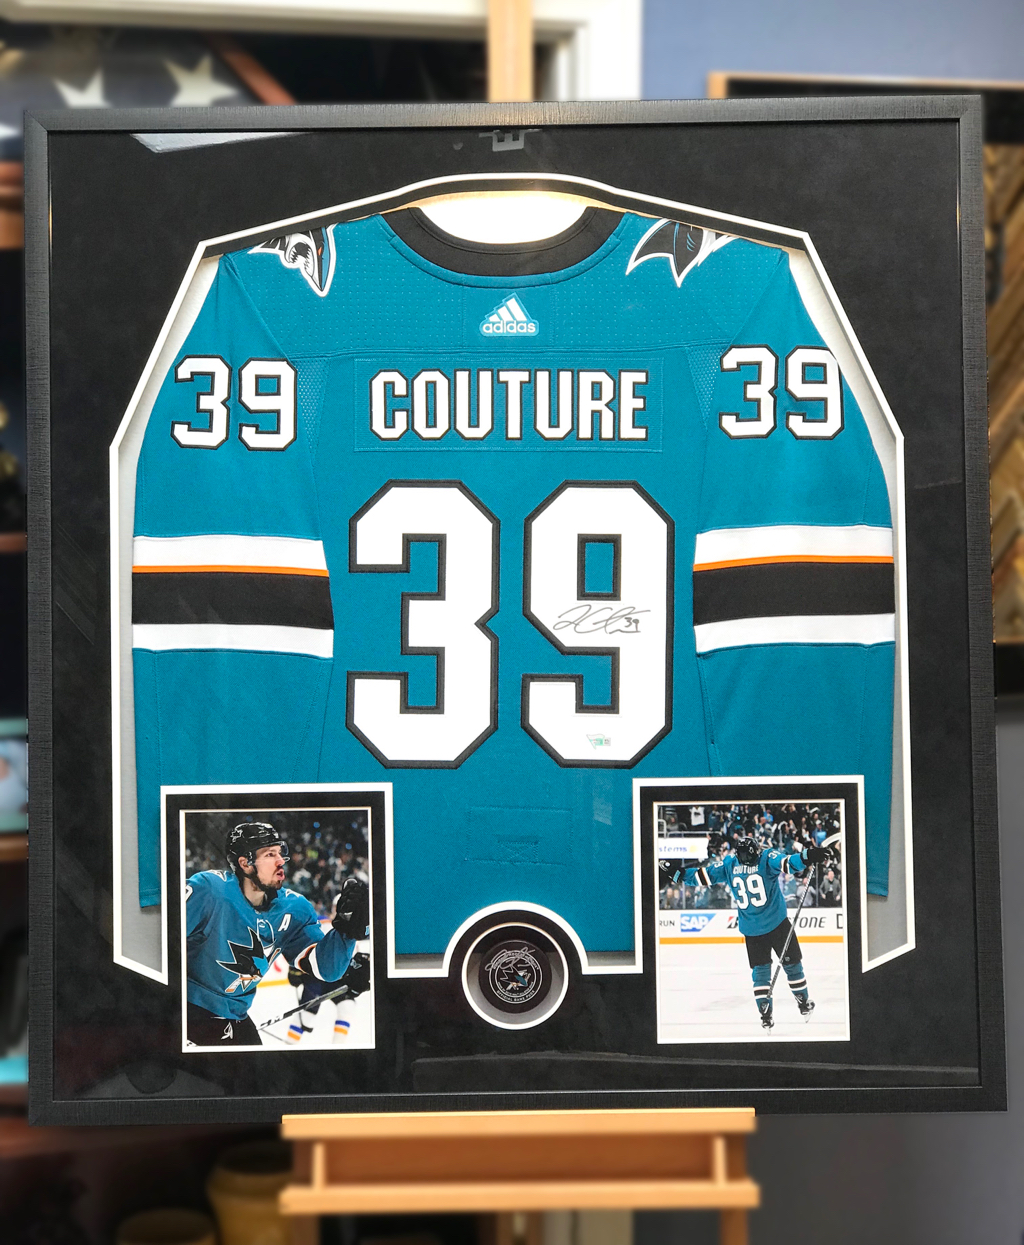 Framing Two Jerseys in One Frame (Photos and Video) - Jacquez Art